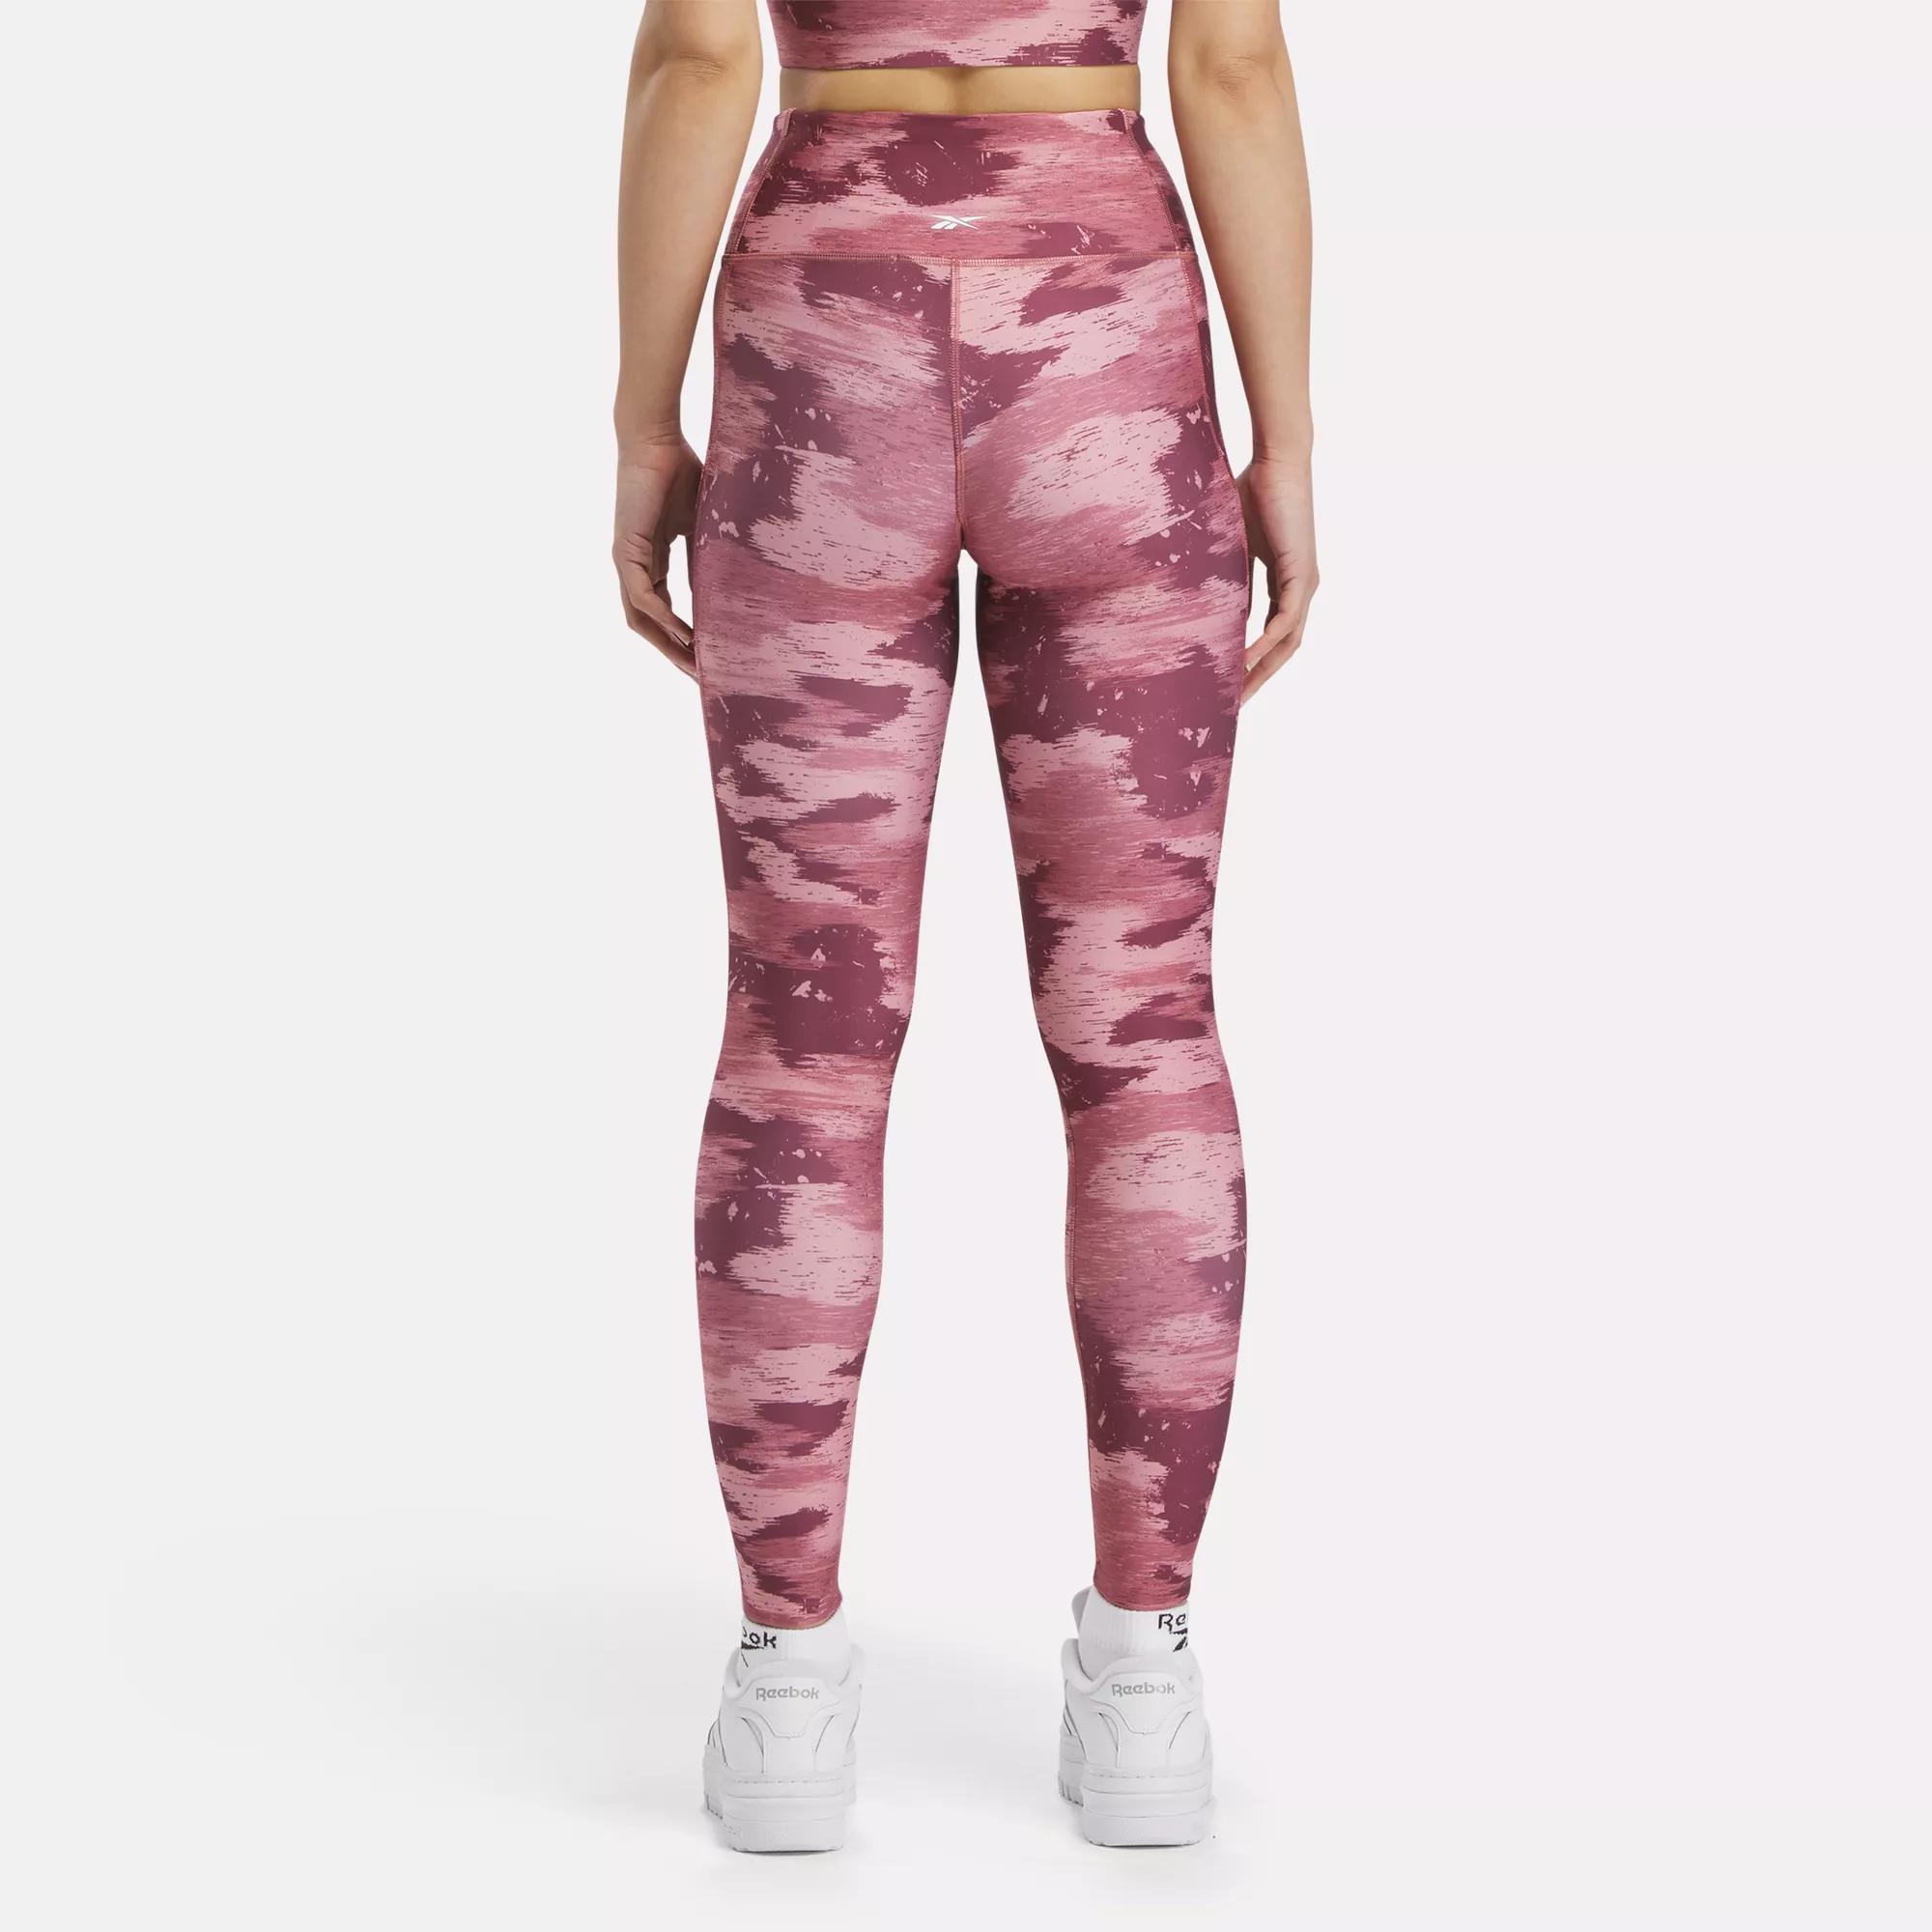 estherpoon - Seamless Set of Camouflage Pattern 4